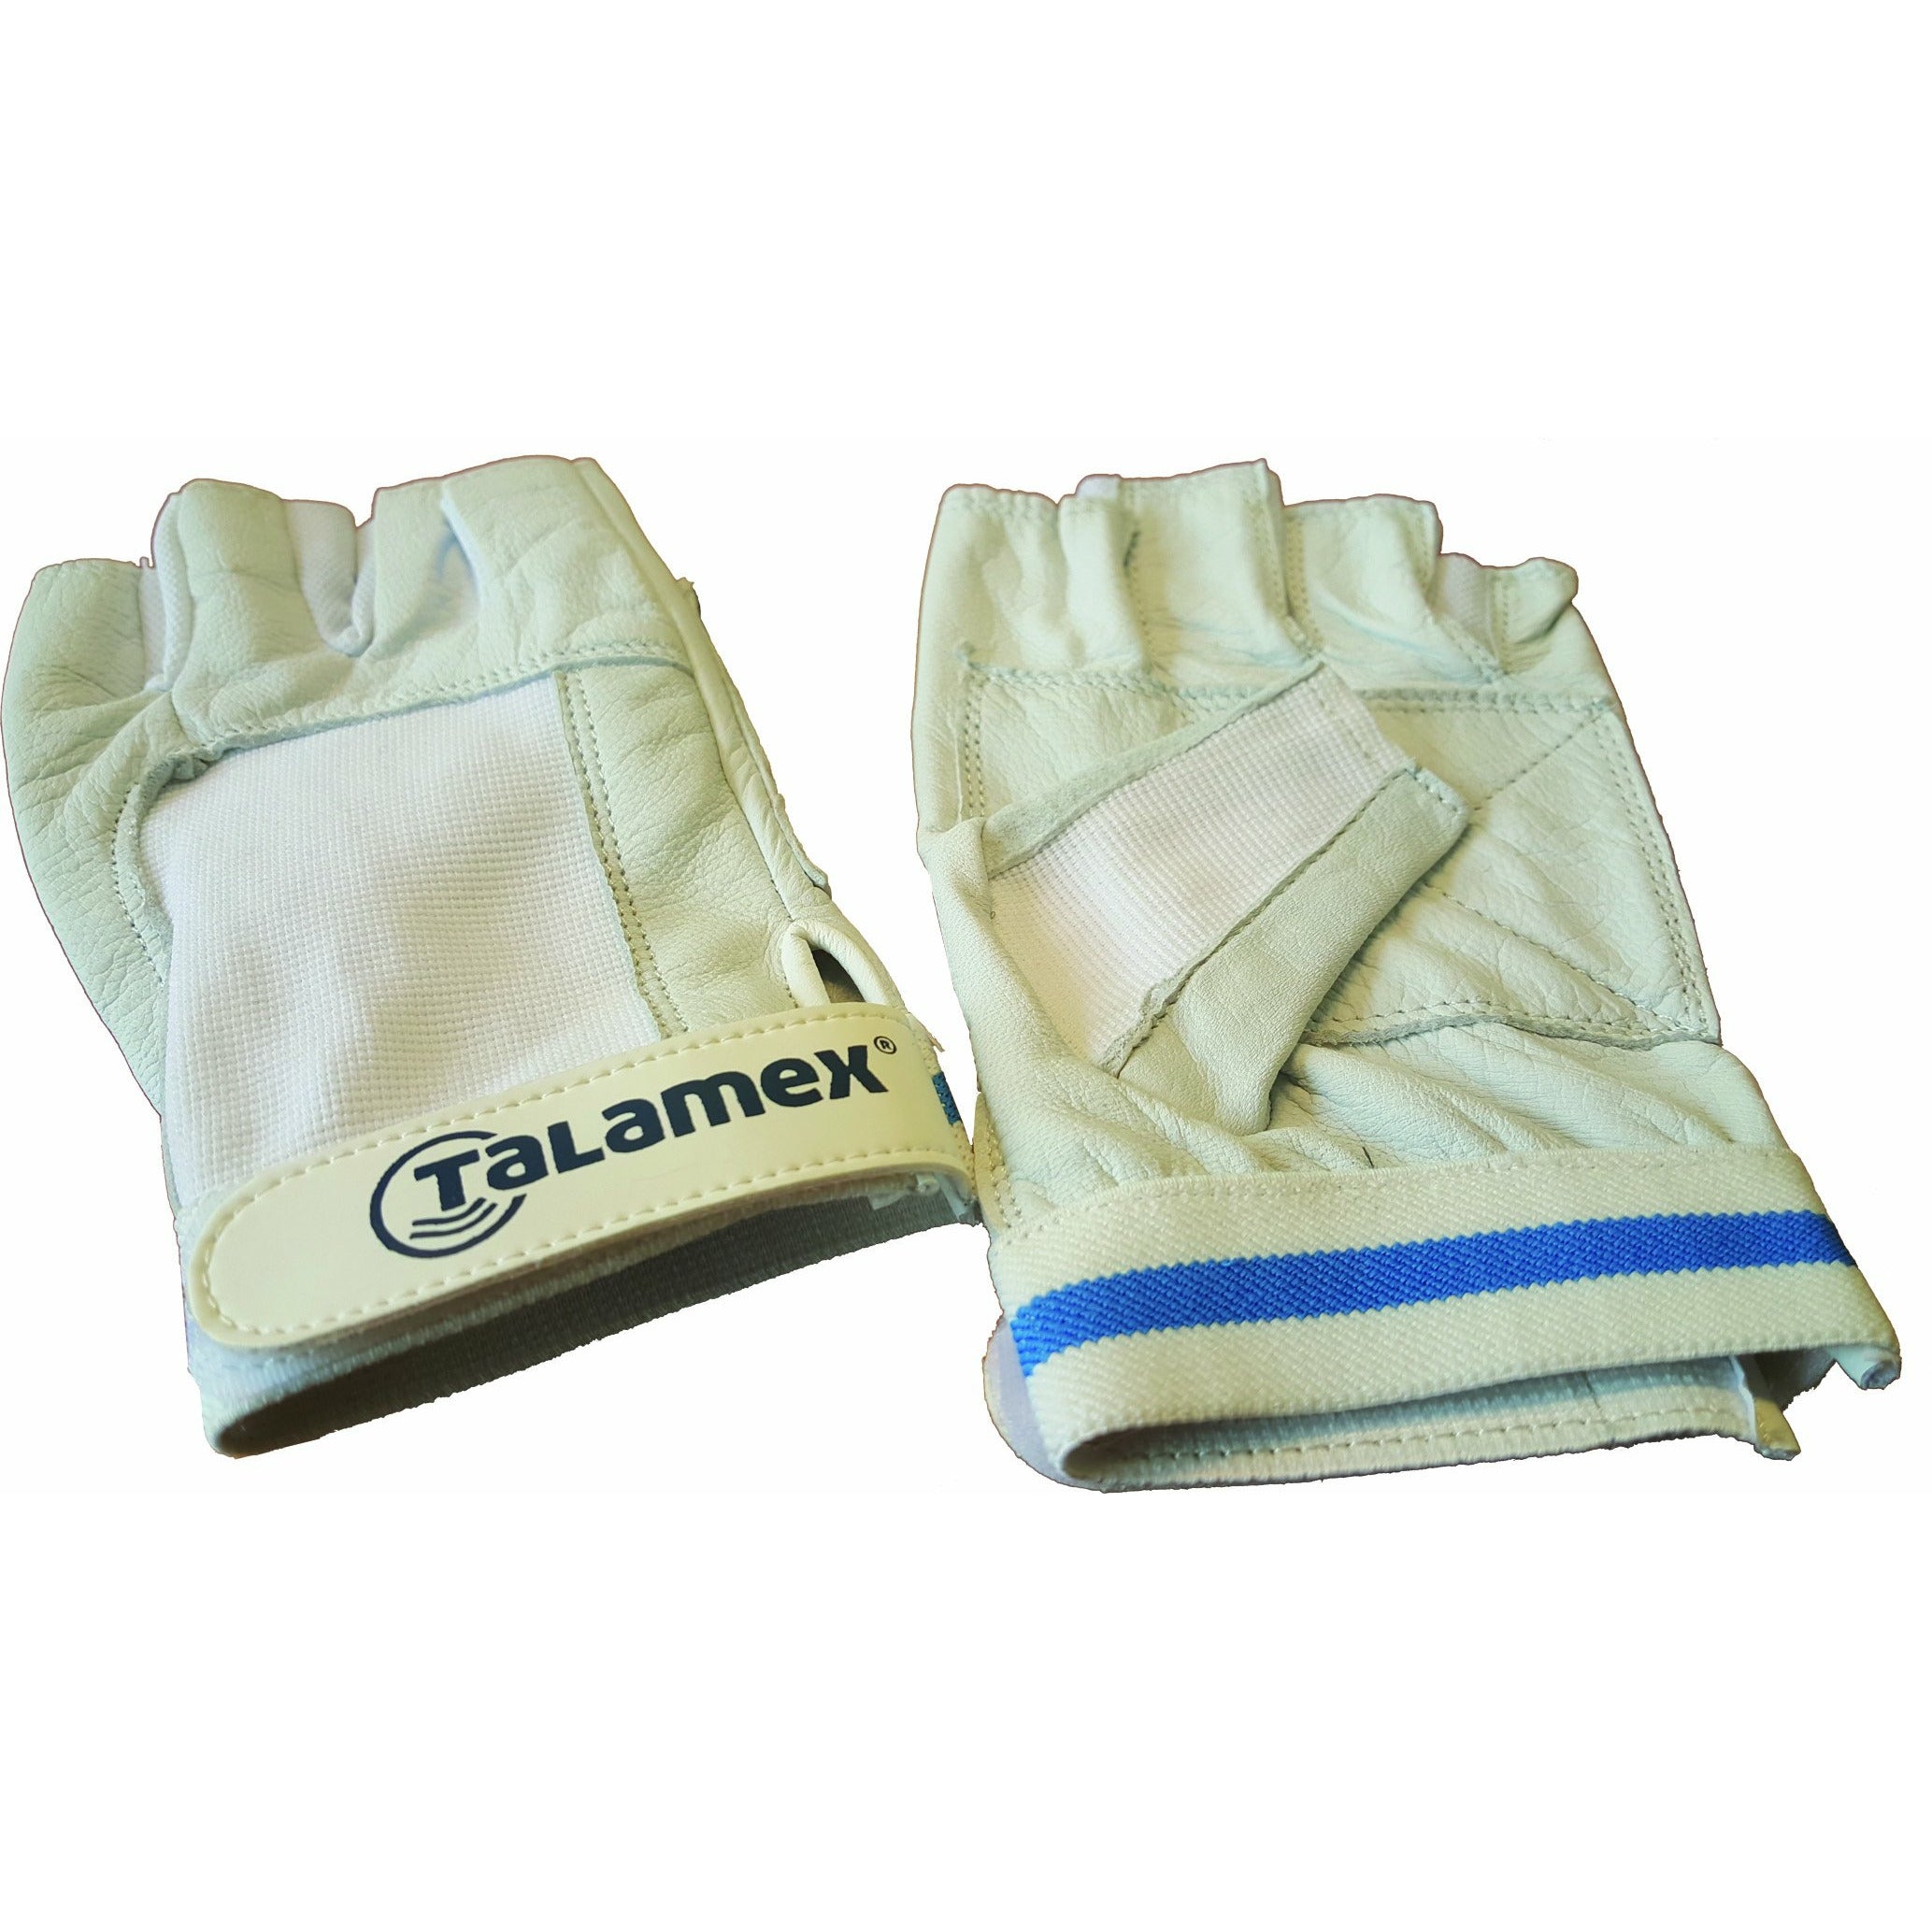 Talamex S'Gloves Open Small 20802001